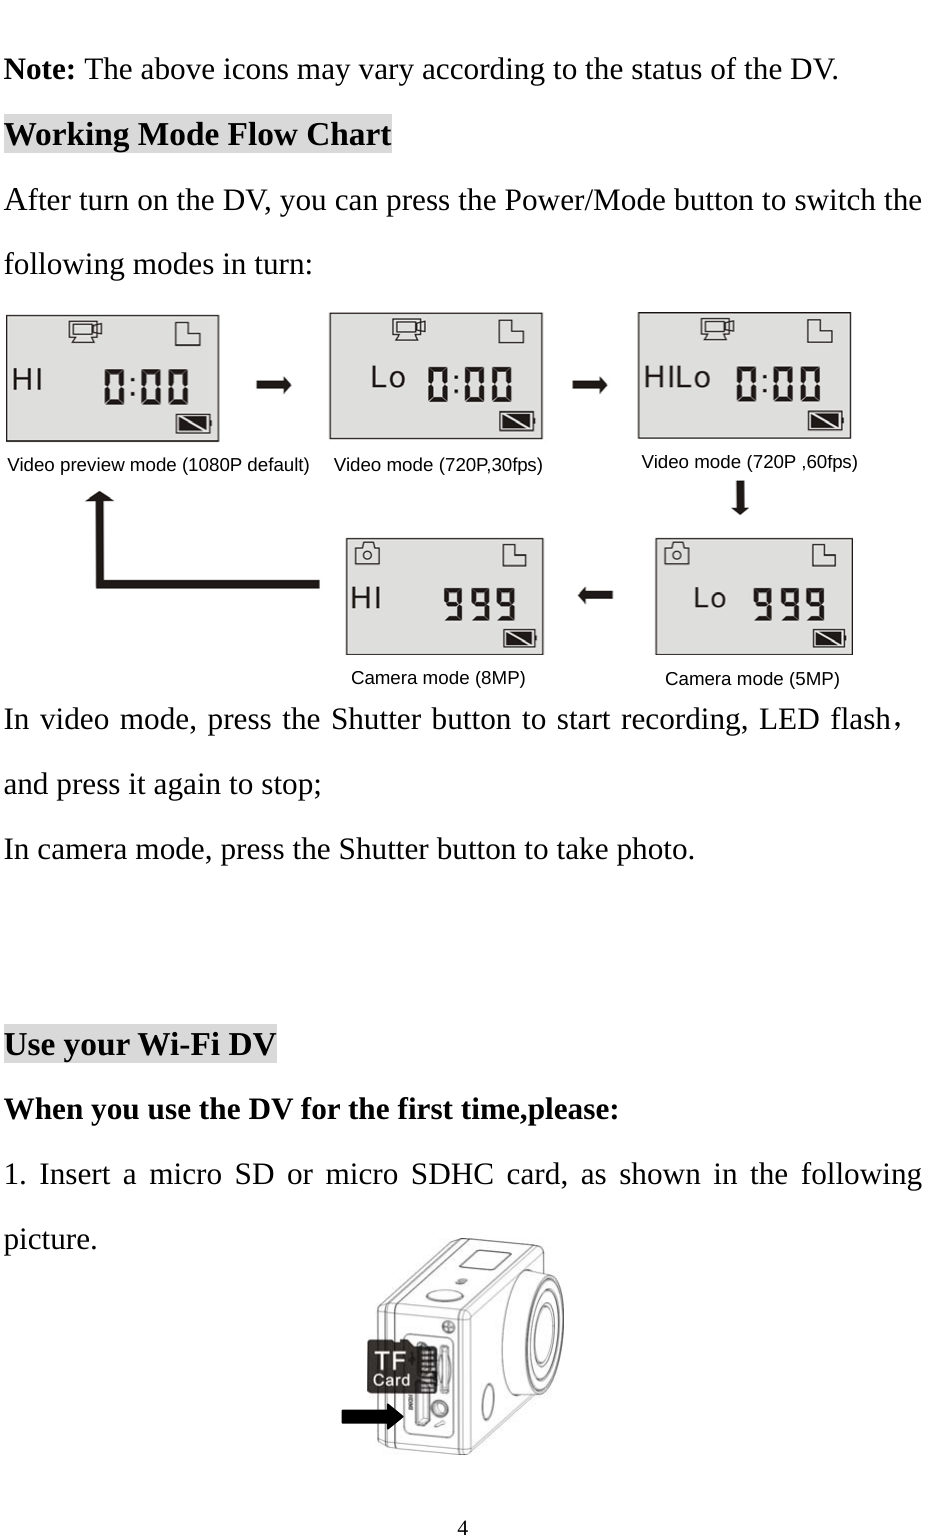   4Note: The above icons may vary according to the status of the DV.   Working Mode Flow Chart After turn on the DV, you can press the Power/Mode button to switch the following modes in turn:       In video mode, press the Shutter button to start recording, LED flash，and press it again to stop; In camera mode, press the Shutter button to take photo.   Use your Wi-Fi DV When you use the DV for the first time,please: 1. Insert a micro SD or micro SDHC card, as shown in the following picture.      Camera mode (8MP)Camera mode (5MP)Video mode (720P ,60fps)Video mode (720P,30fps)Video preview mode (1080P default) 